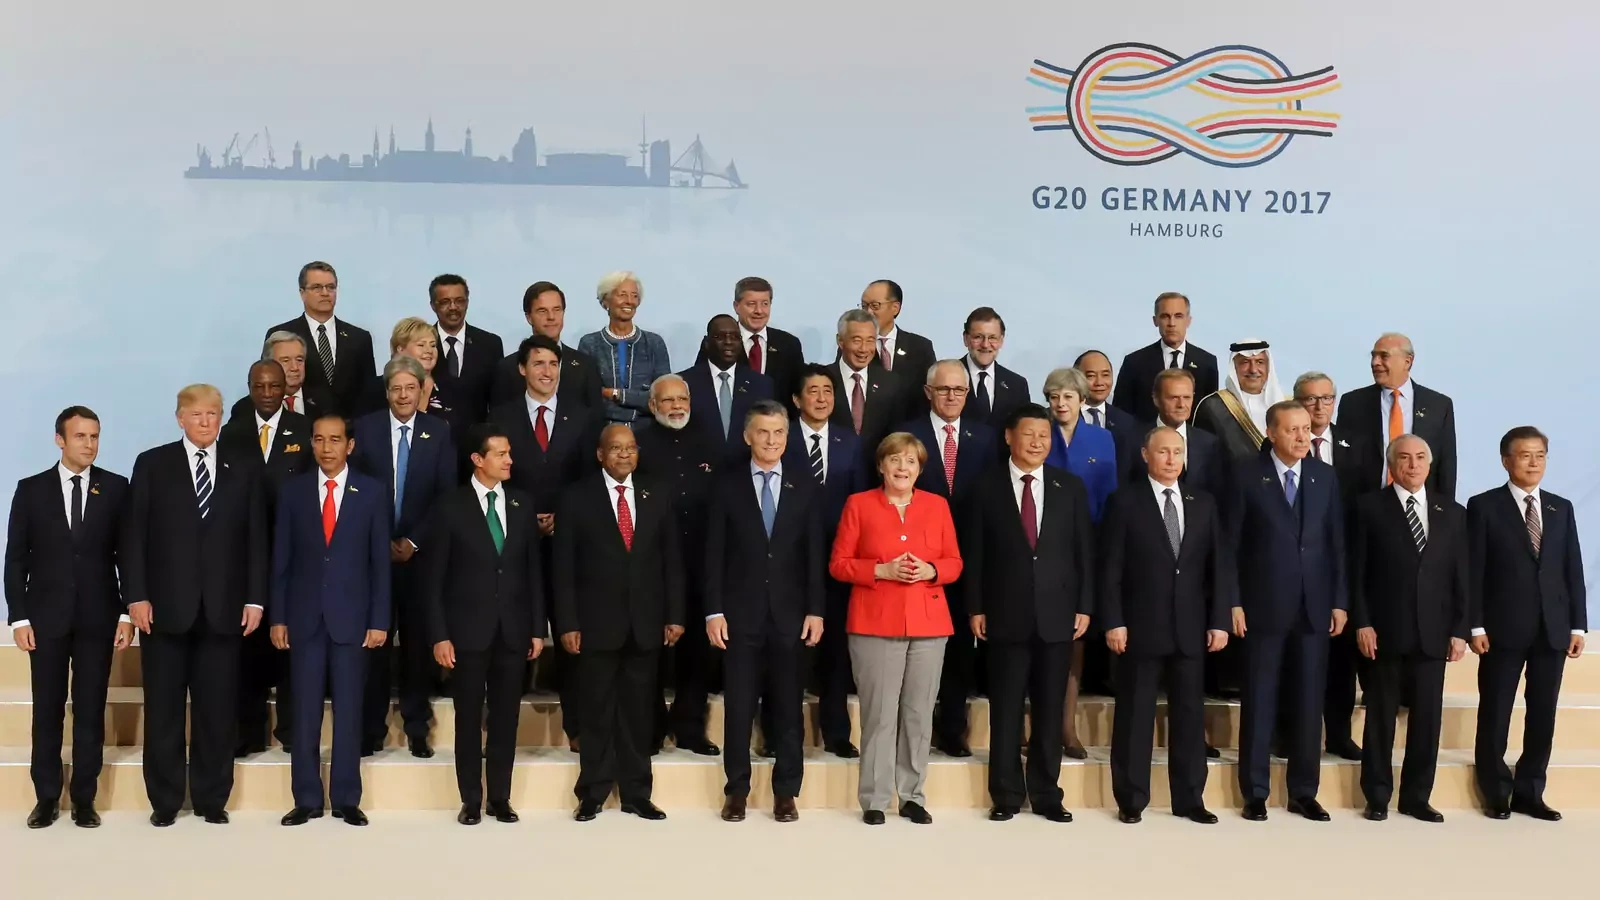 Leaders of the G20, EU, UN, and IMF at the G20 leaders summit in Hamburg, Germany July 7, 2017.